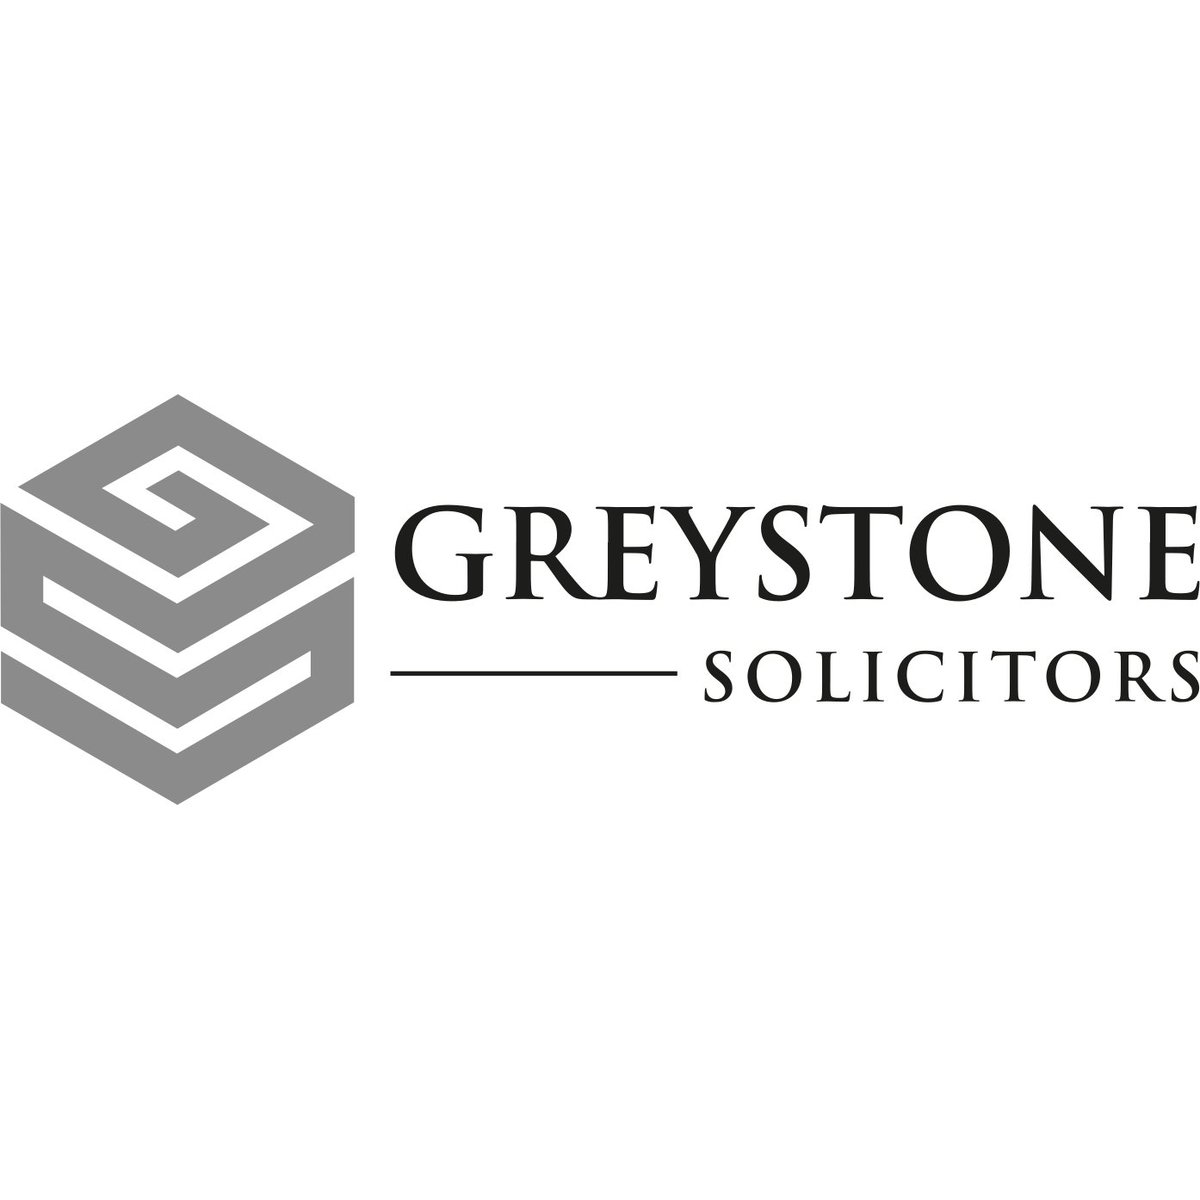 A massive thank you to Greystone Solicitors for being a Silver Sponsor for our Afternoon Tea Event. Thank you for your support and contributions to help the Curry Kitchen which feeds over 100 people every Friday. To get involved please email: mostaque@barthamgroup.com